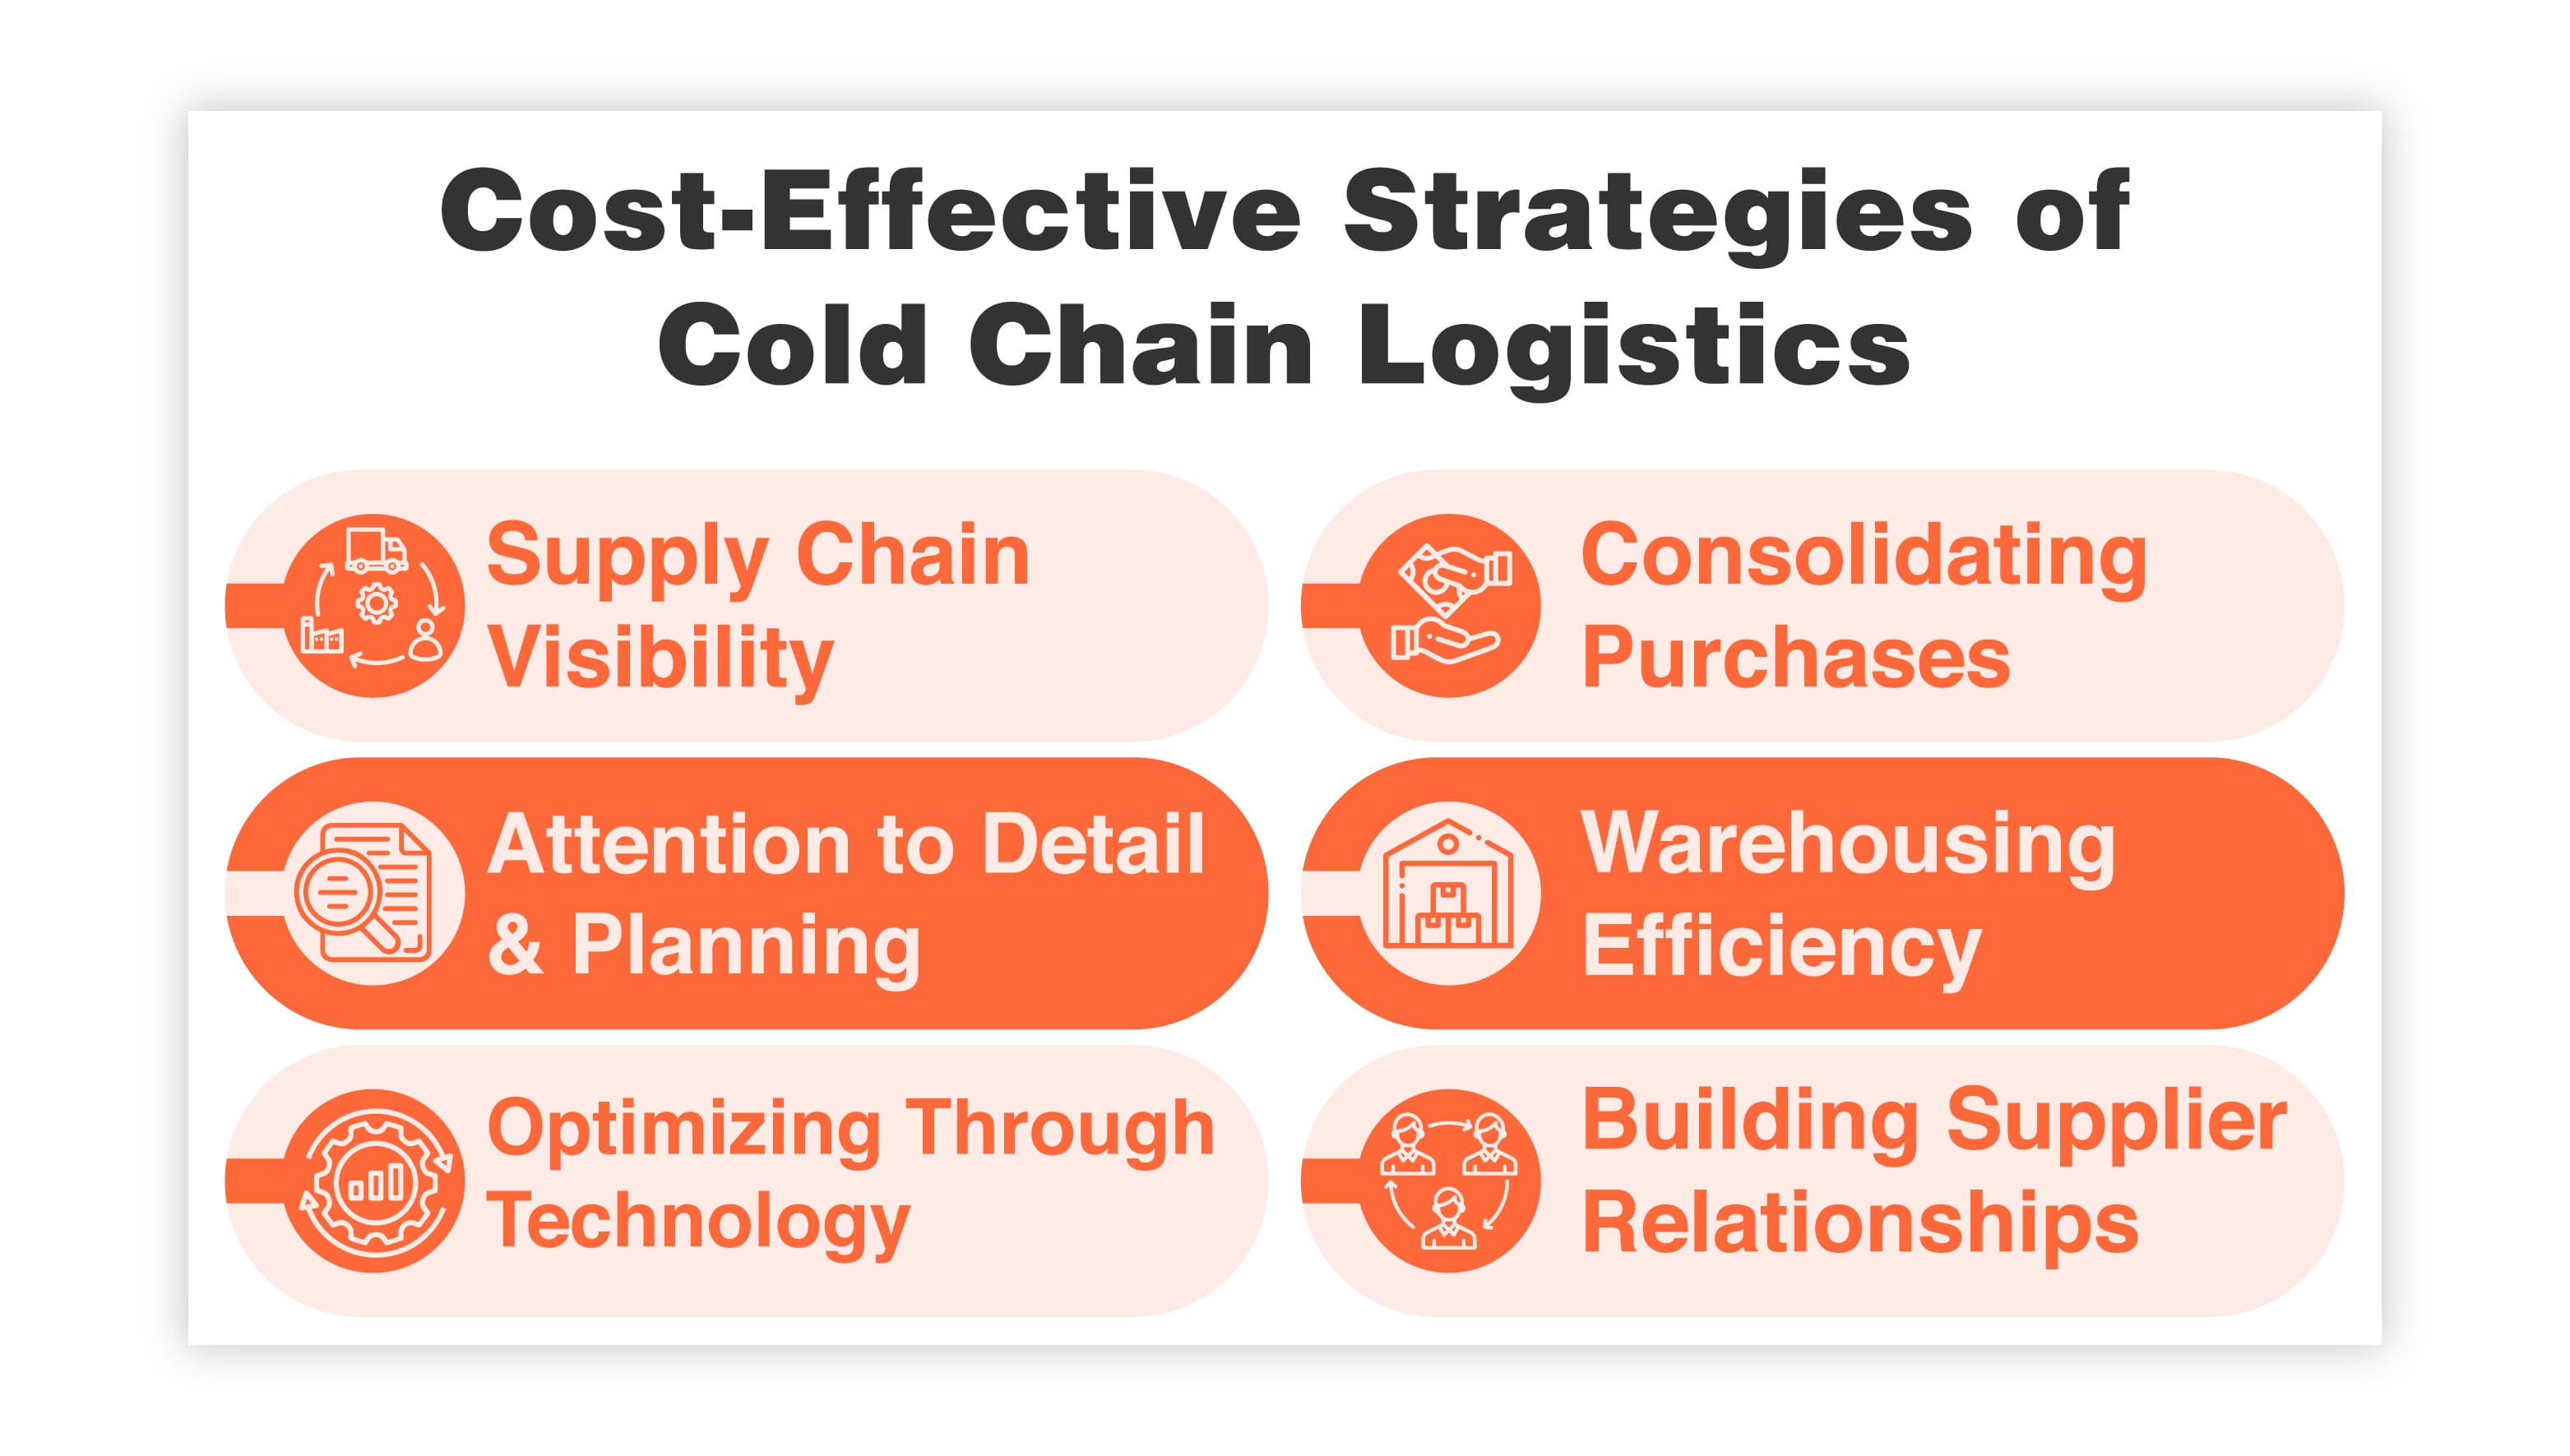 4 Cost-Effective Strategies of Cold Chain Logistics